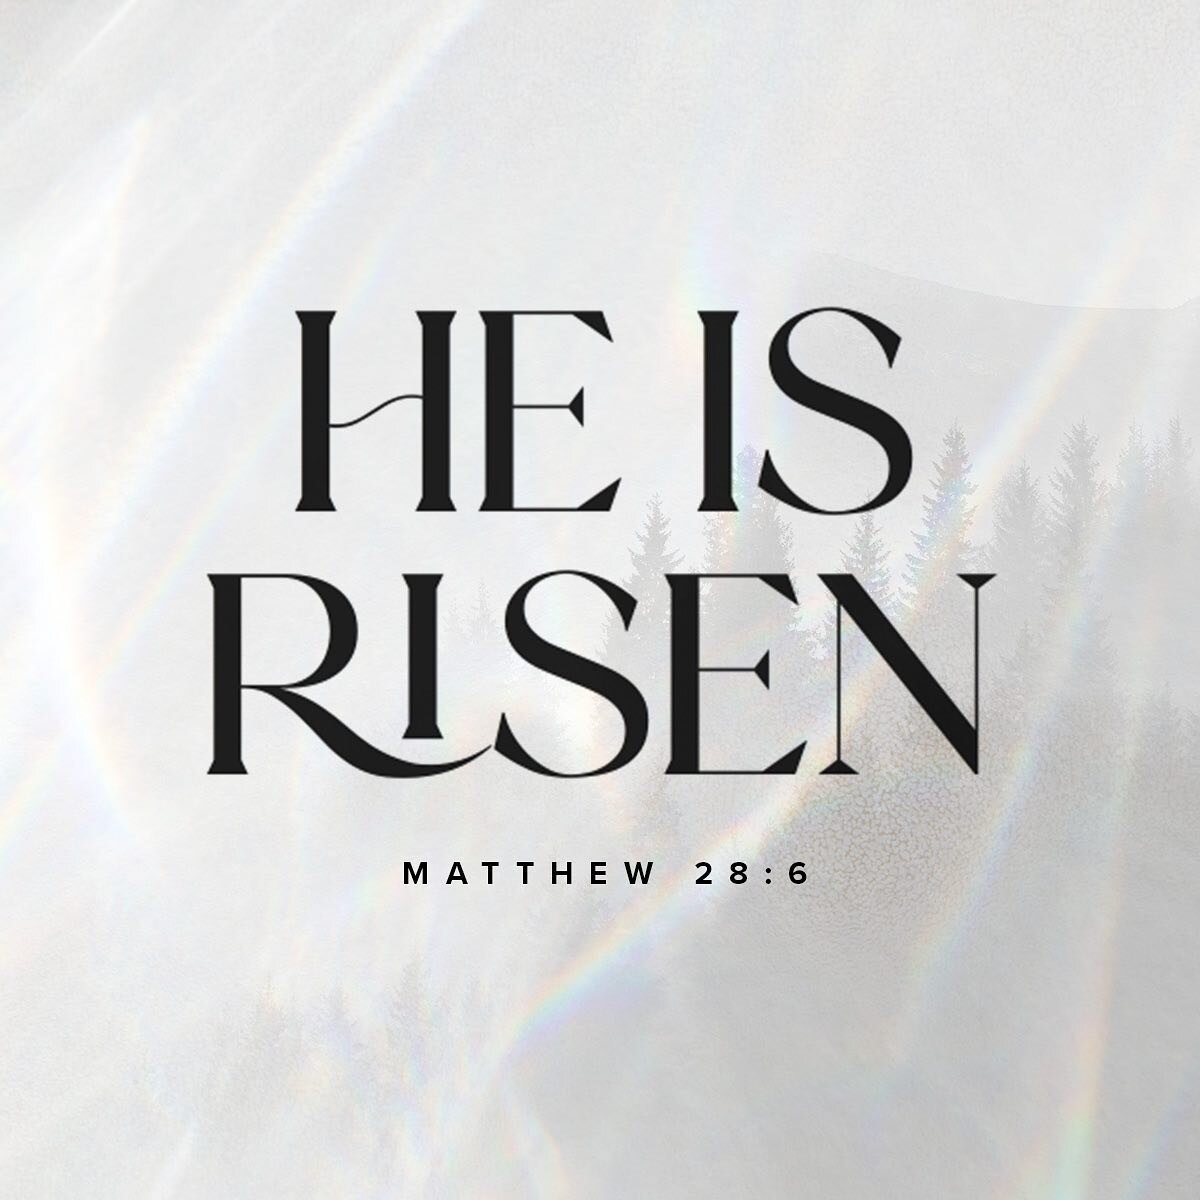 &ldquo;He is not here; he has risen, just as he said. Come and see the place where he lay.&rdquo; Matthew 28:6

#graphicdesigner #graphicdesign #easter #heisrisen #jesusisking #scripture